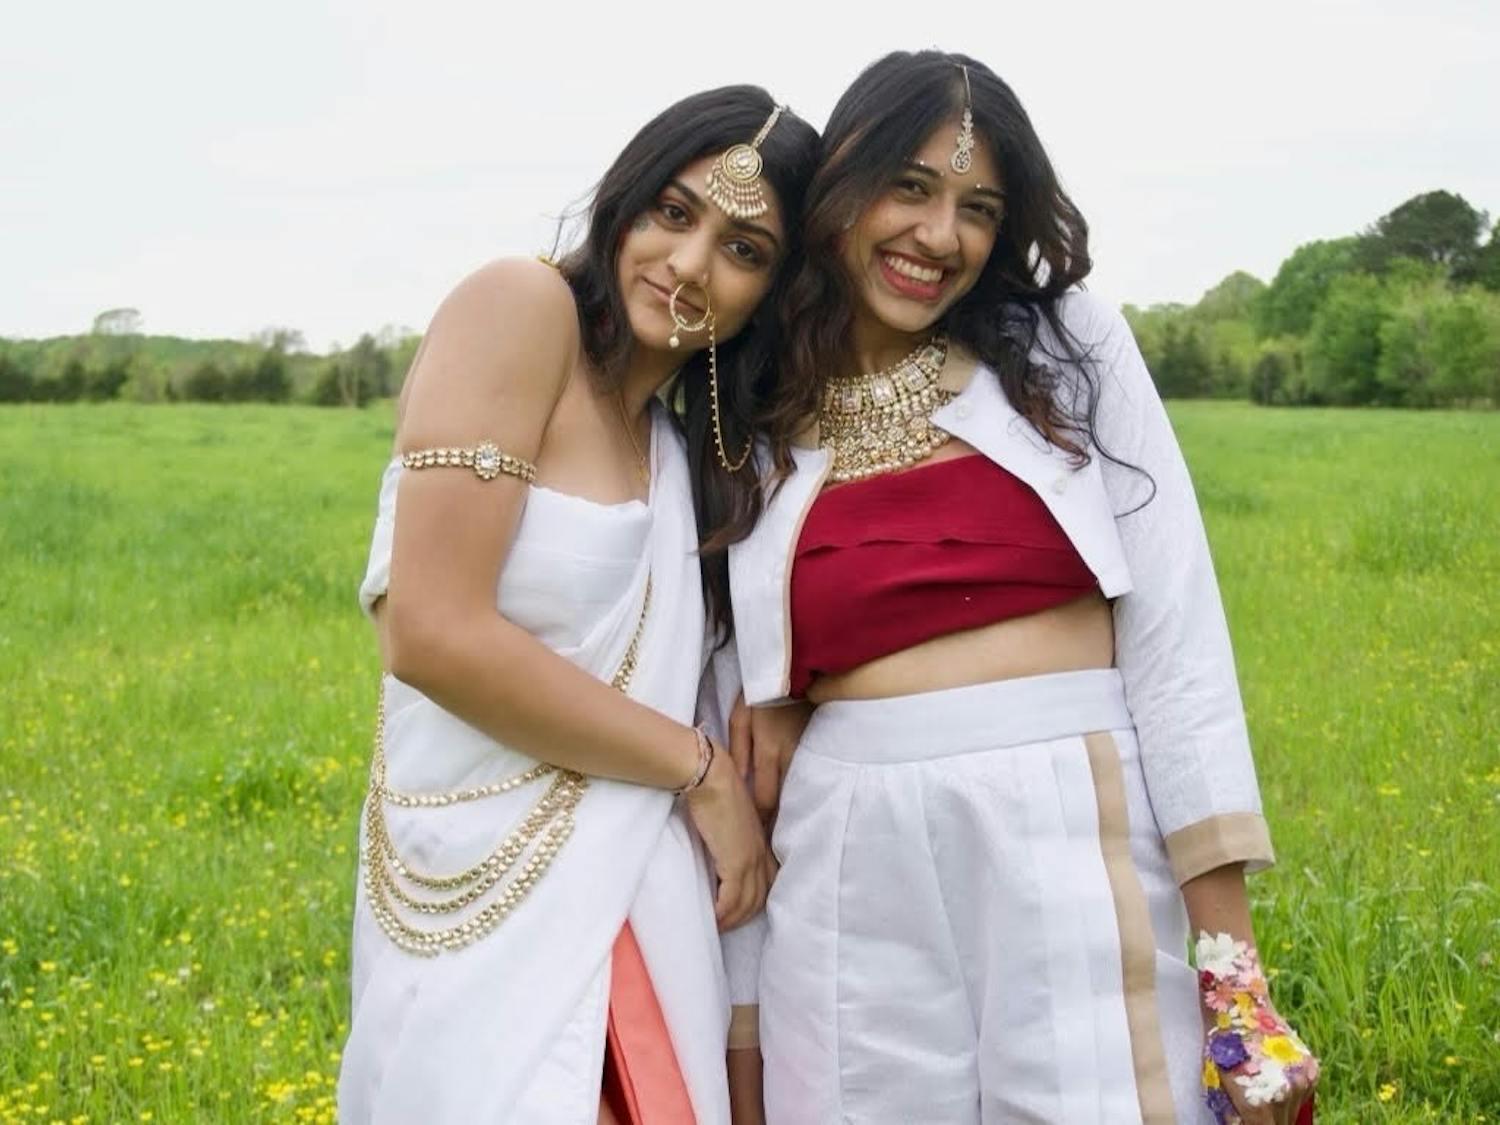 Pareen Bhagat(left), Hrishika Muthukrishnan(right) are dressed in clothing designed by Pareen Bhagat and accessorized in traditional Indian jewelry and colors. Photo courtesy of Izzy d'Alo.&nbsp;